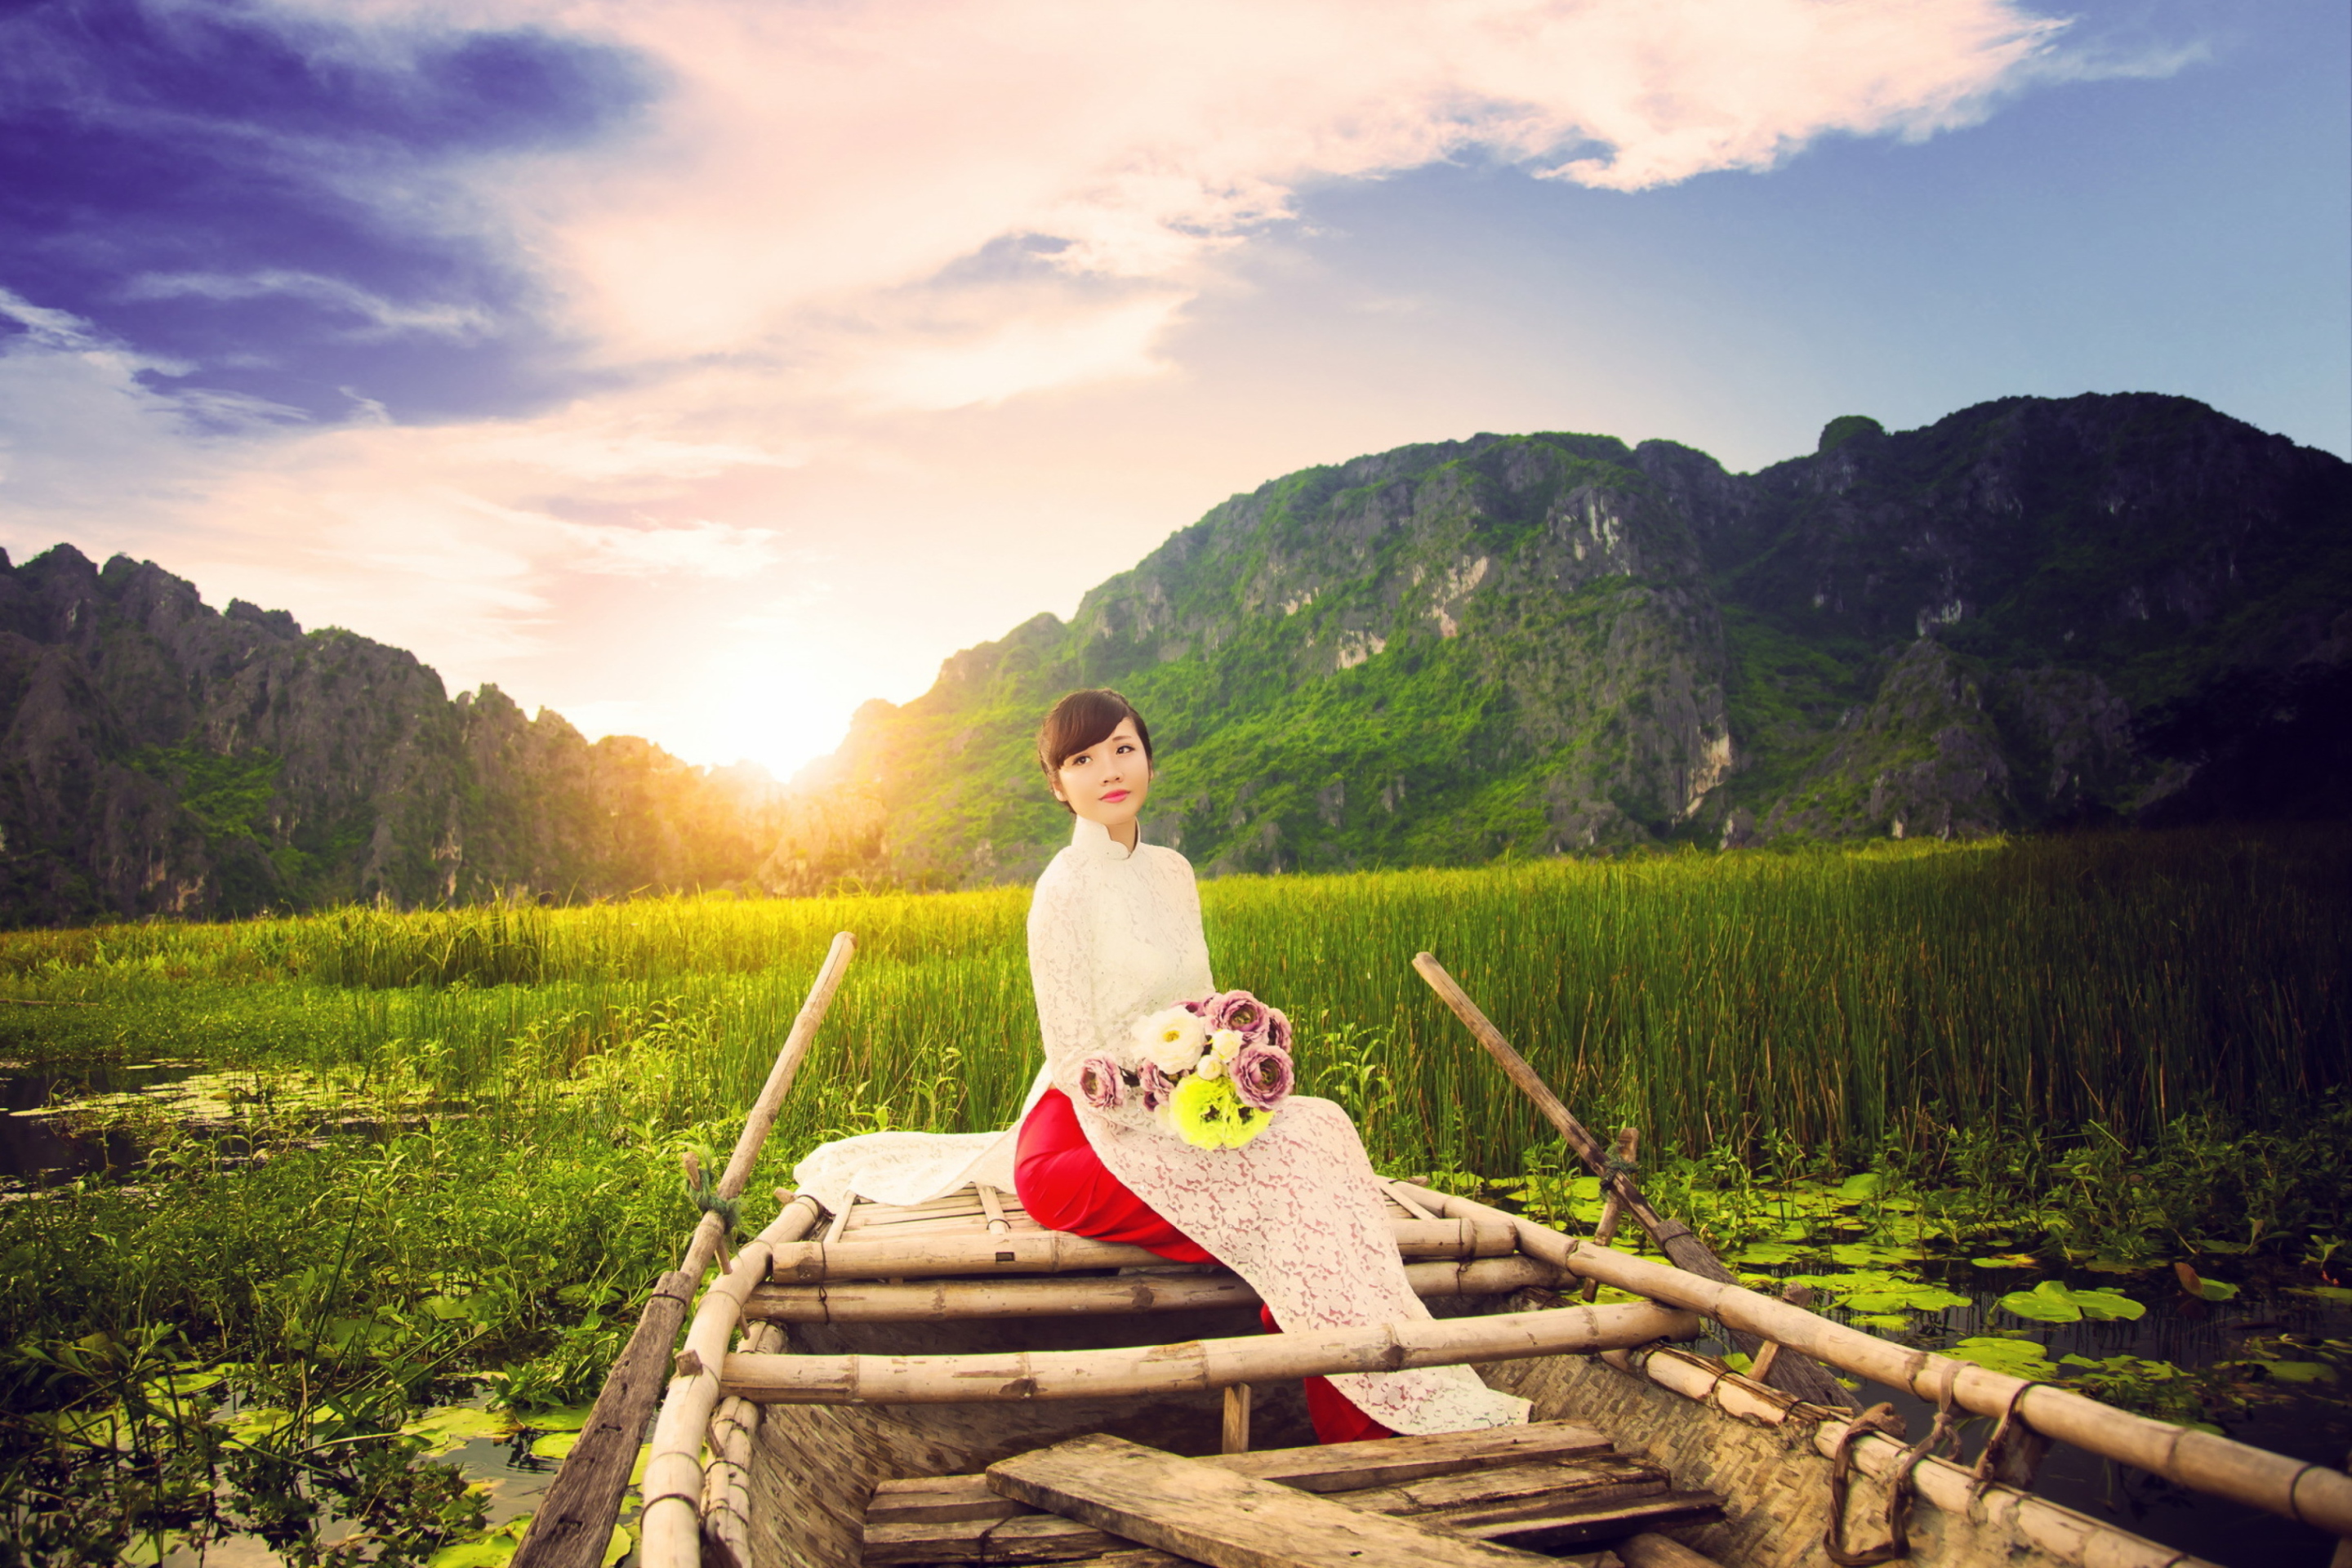 Das Beautiful Asian Girl With Flowers Bouquet Sitting In Boat Wallpaper 2880x1920